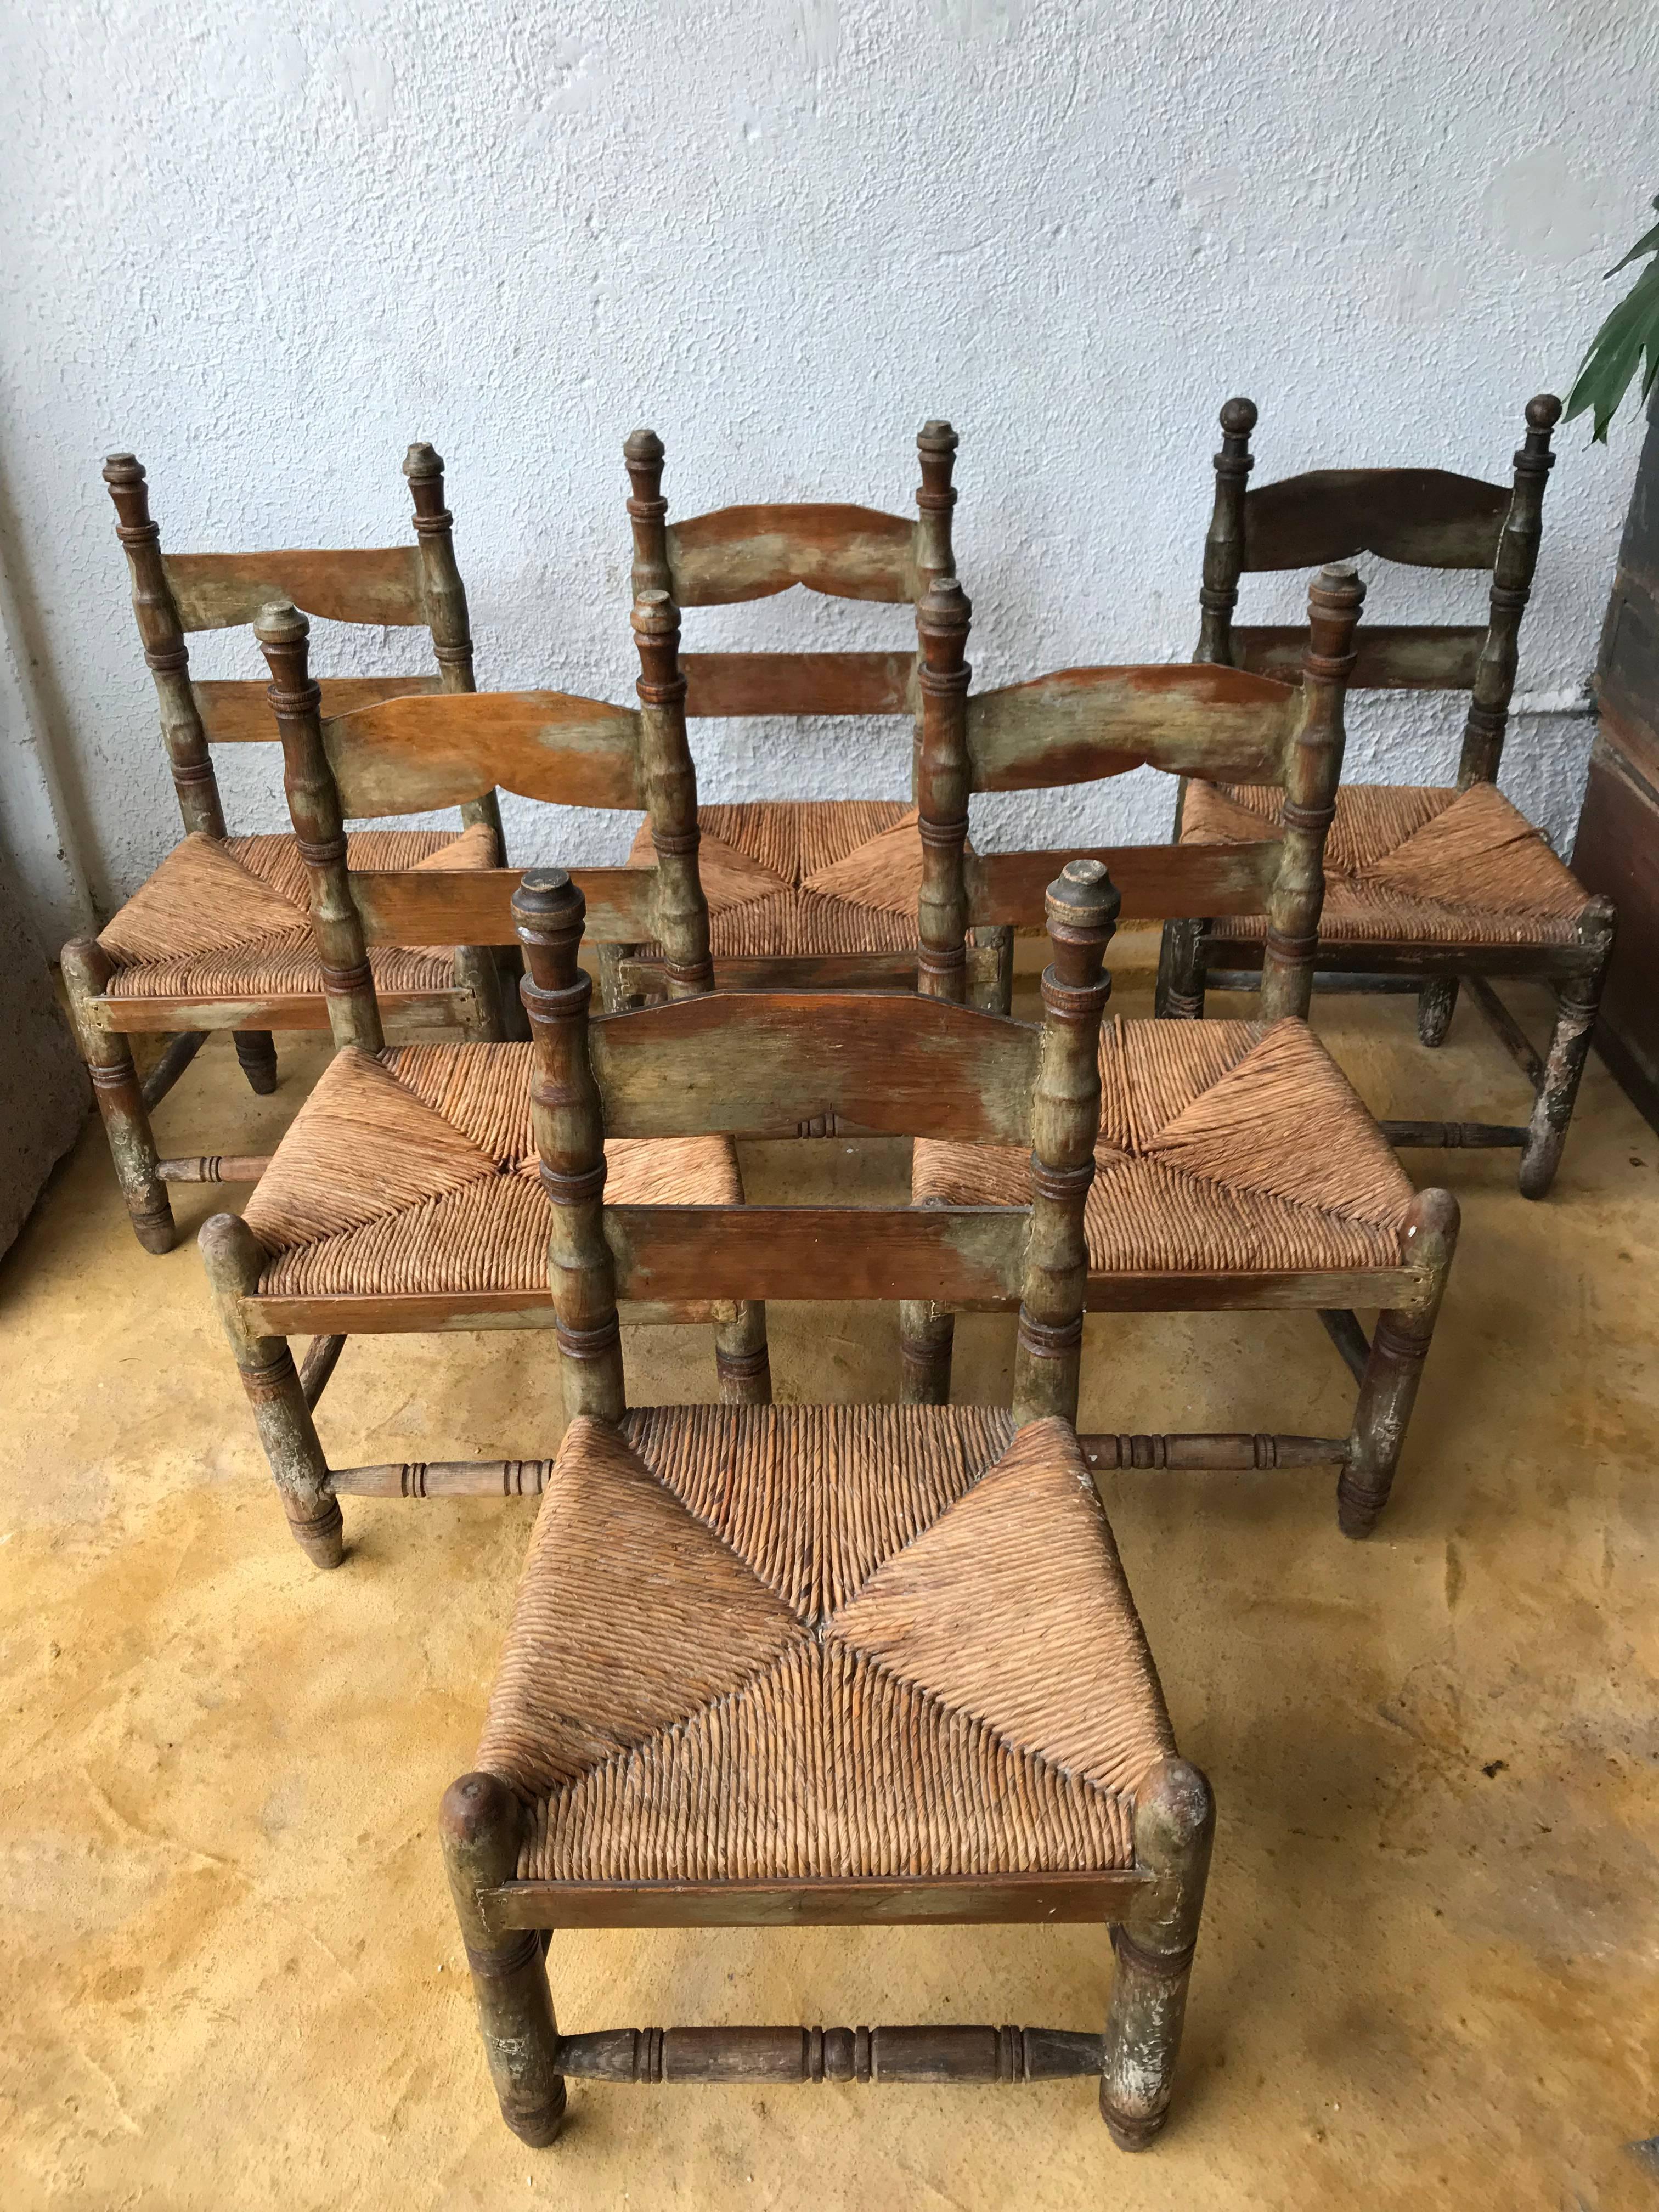 Beautiful set of six beautiful antique wood chairs found in Central México. 
The structure is made with turned pinewood, the seating is weaved Tule.
This type of chair was very popular during the early years of the 20th century in small towns or